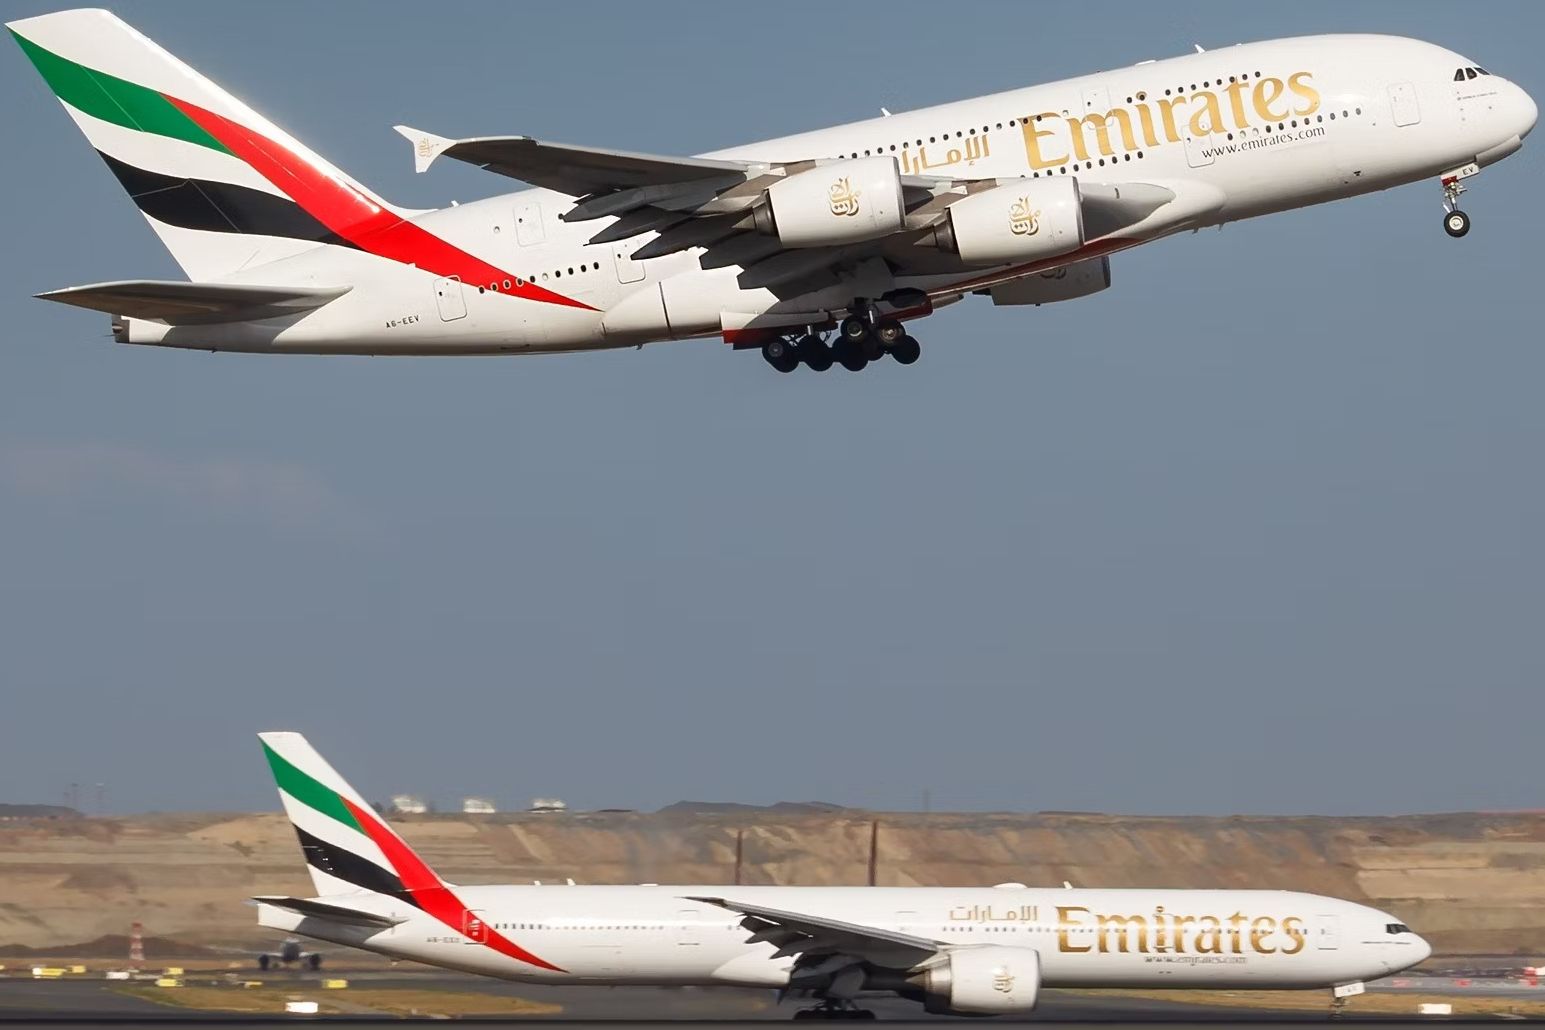 An Emirates Airbus A380 taking off while an Emirates Boeing 777 sits on a taxiway.